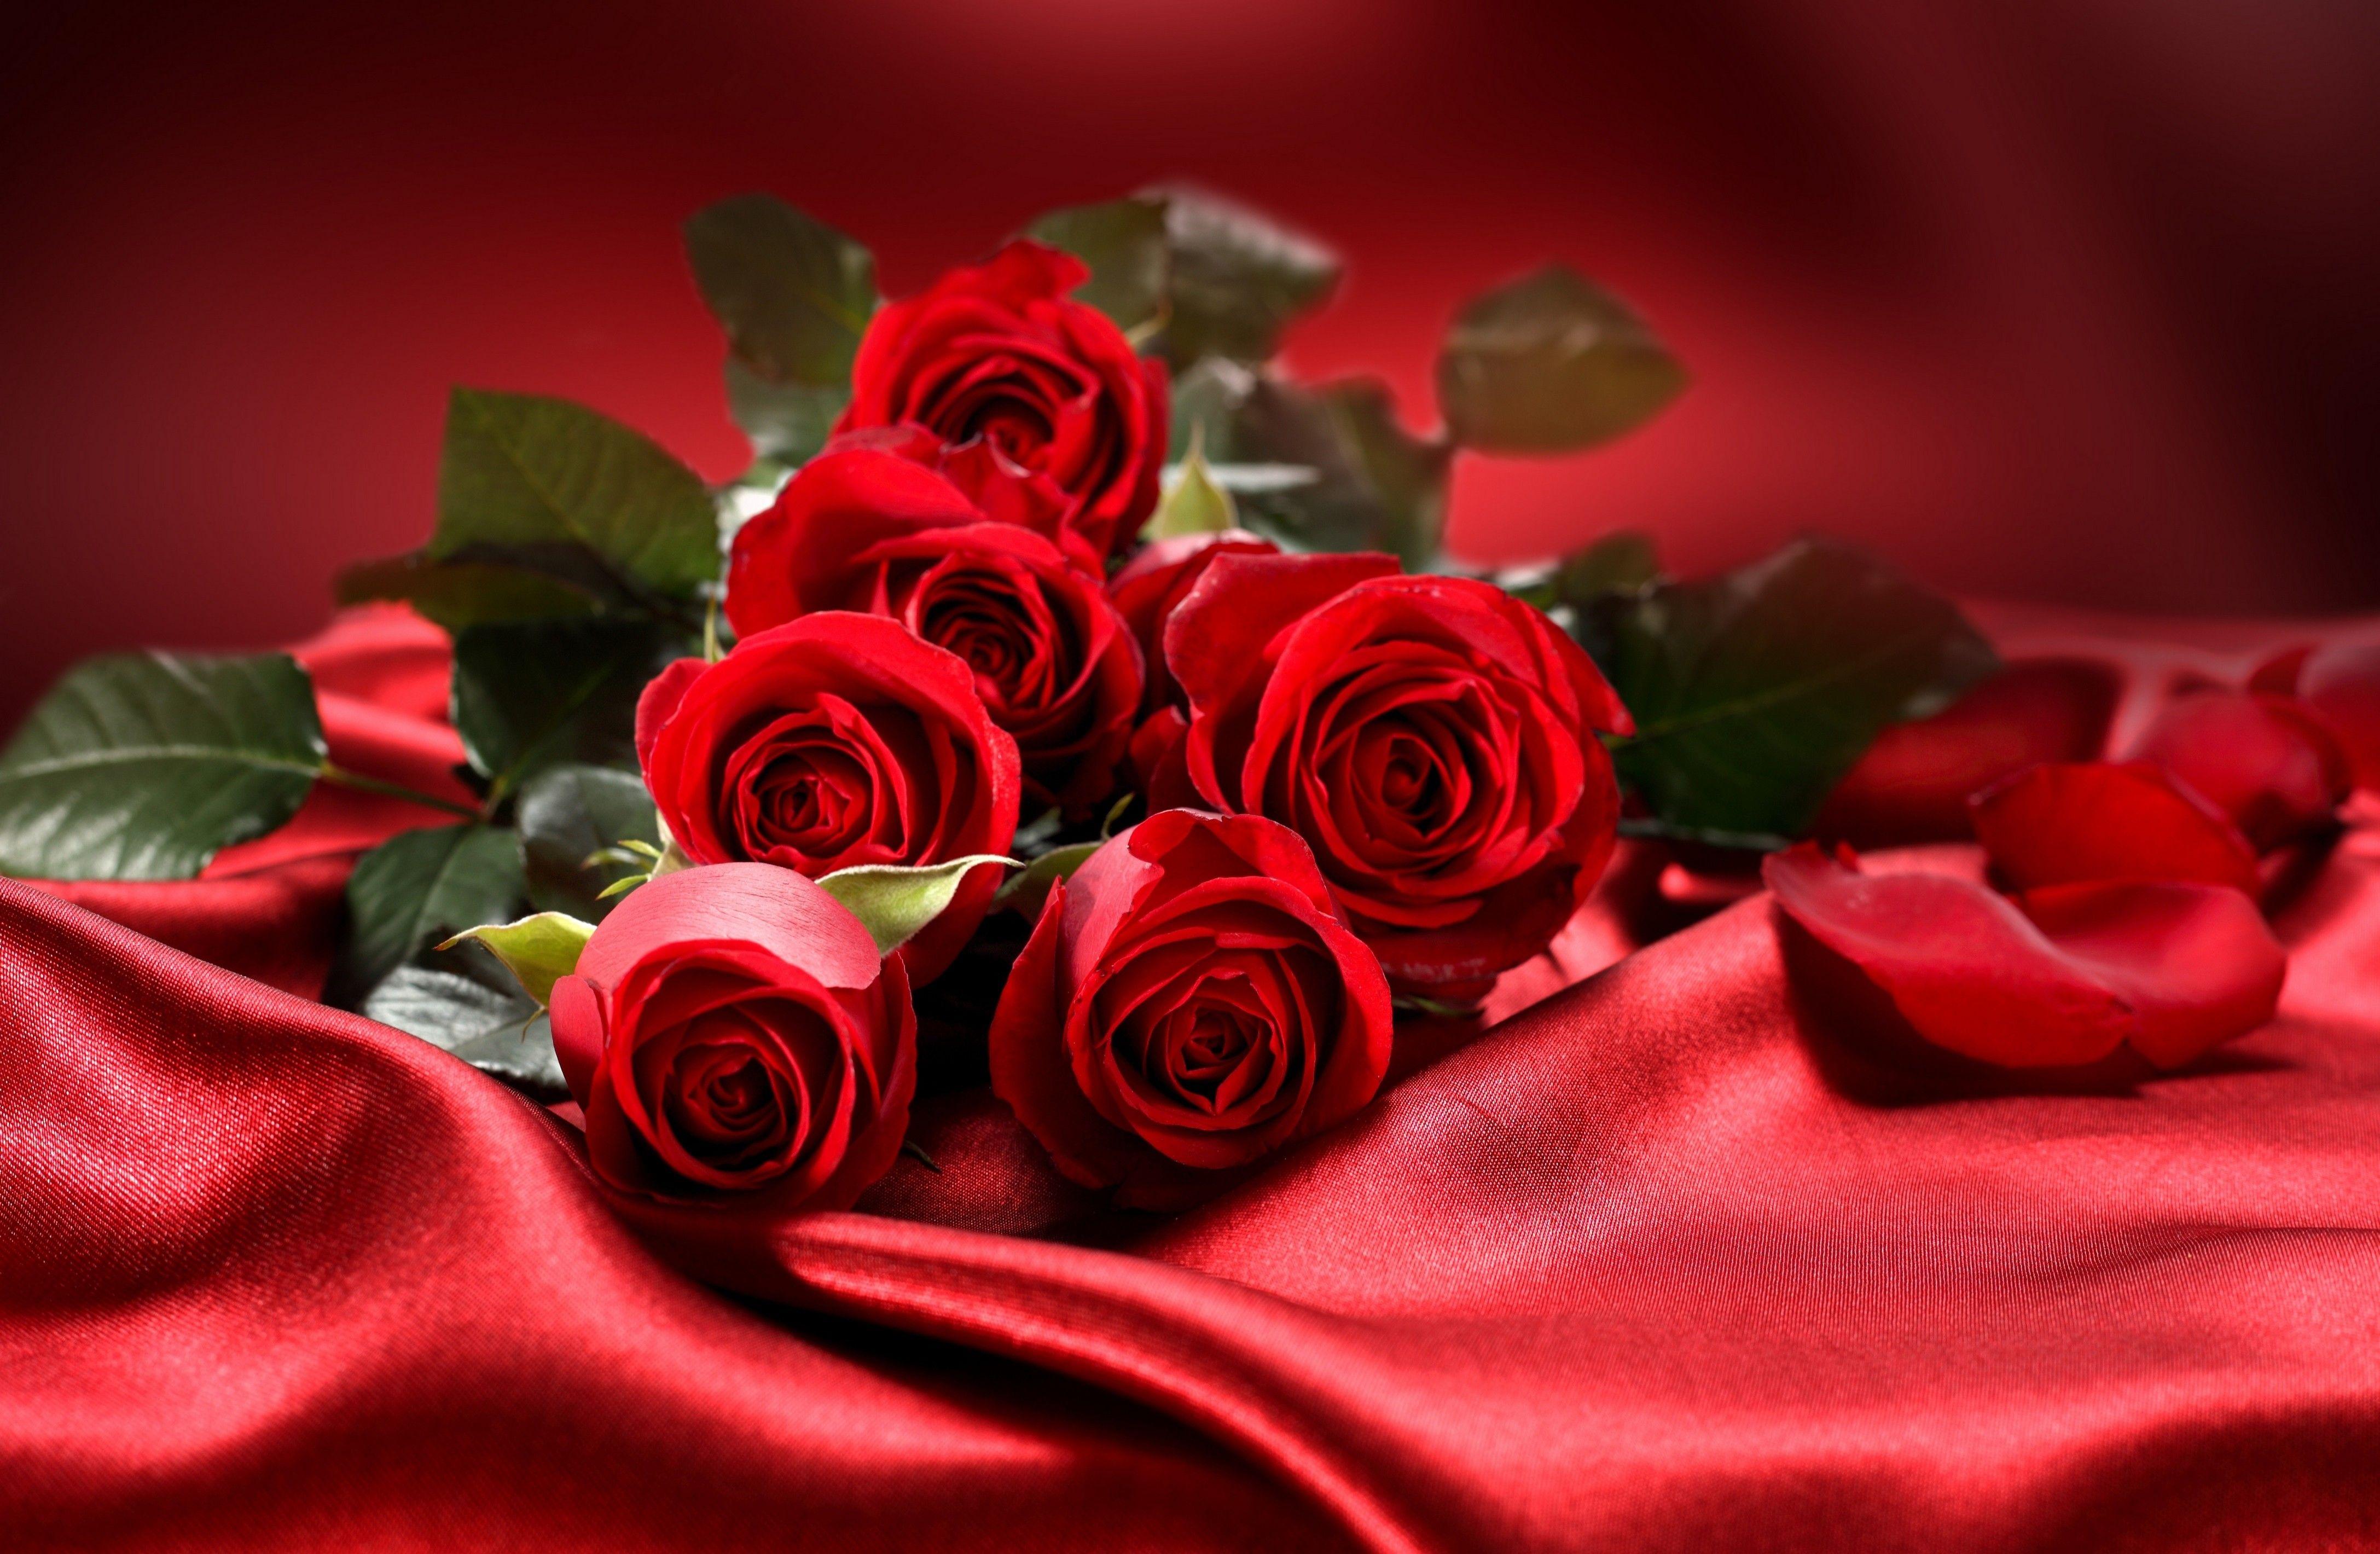 Red roses on the red silk moment. Flowers Wallpaper. Nature Wallpaper. download beautiful HD Wallpa. Beautiful flowers wallpaper, Red rose bouquet, Rose